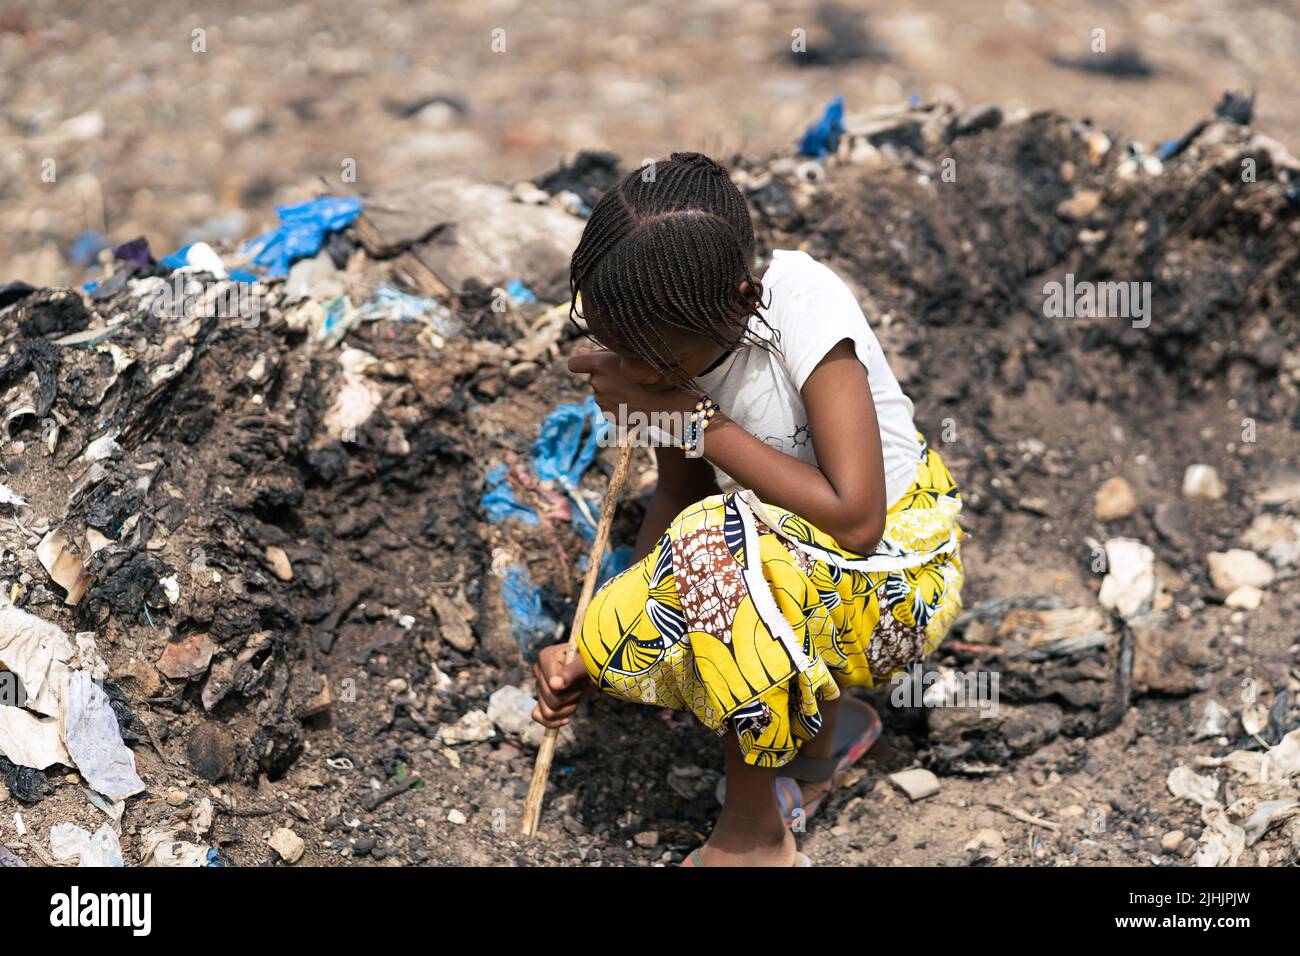 Tiny African girl rummaging through a pile of damp and dirty street litter with a wooden stick, looking for recyclable items to sell Stock Photo